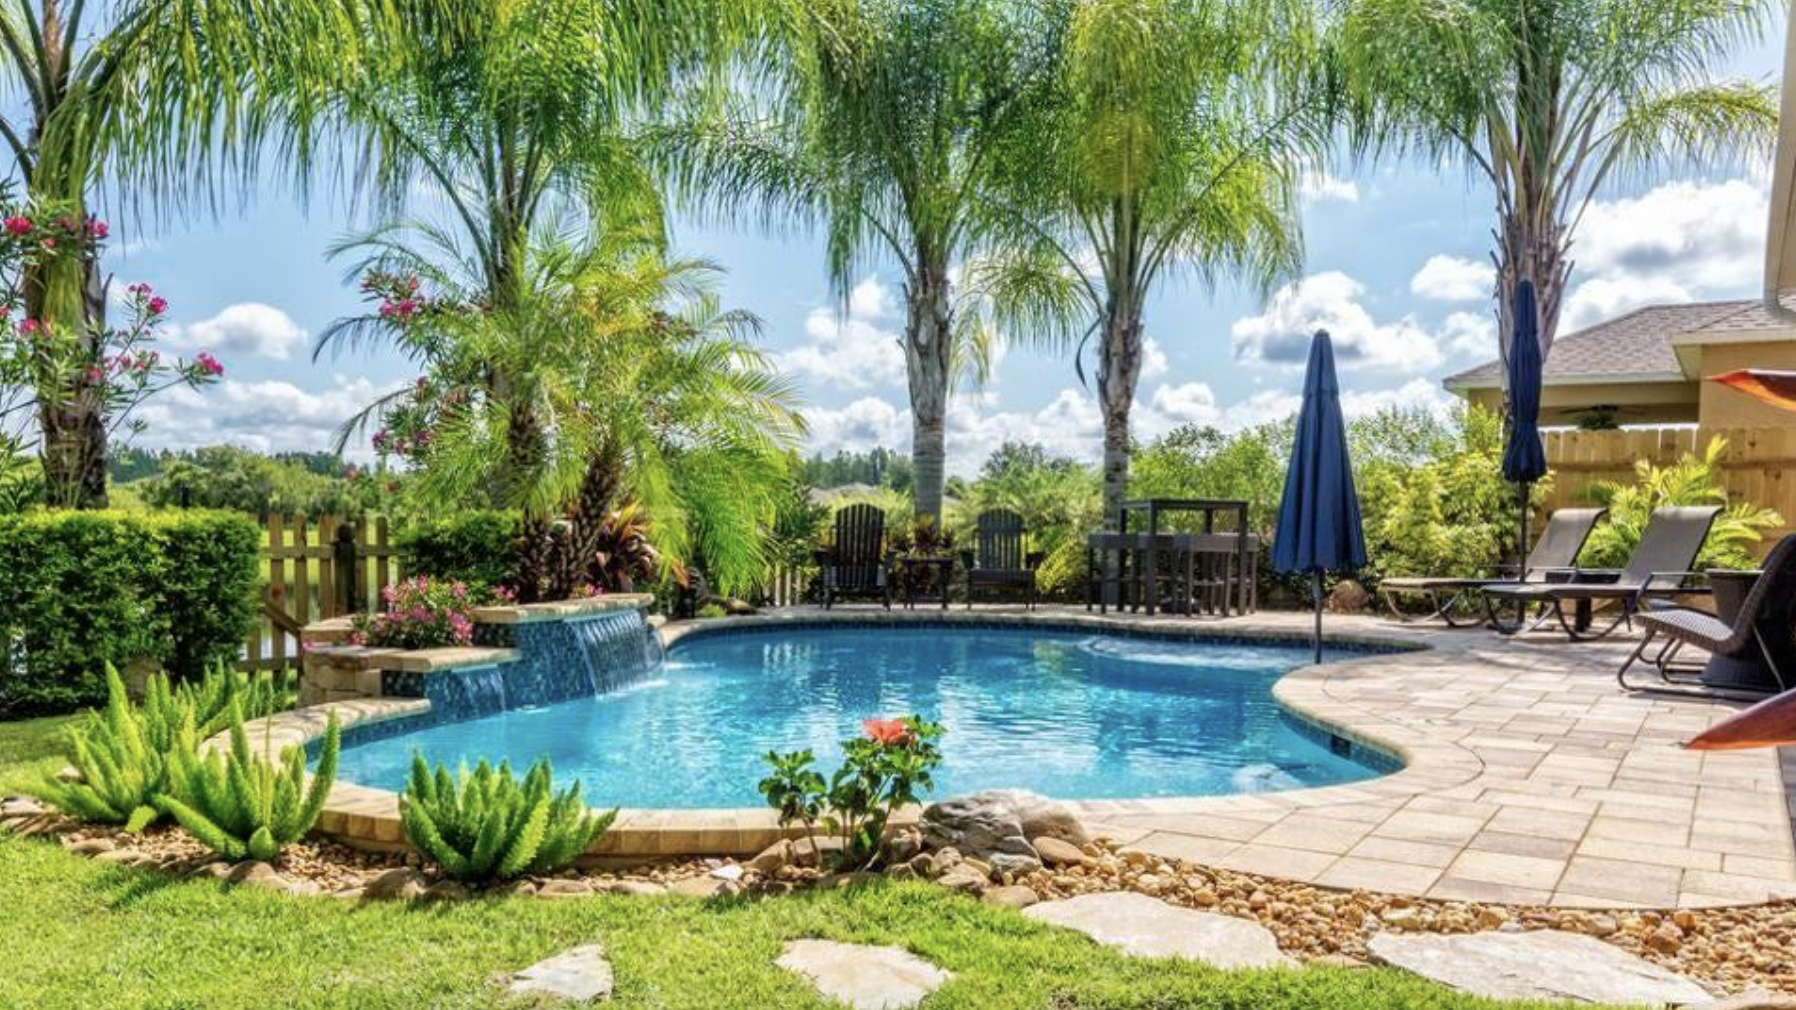 The Best Pool Landscaping Ideas to Complement Your Outdoor Space